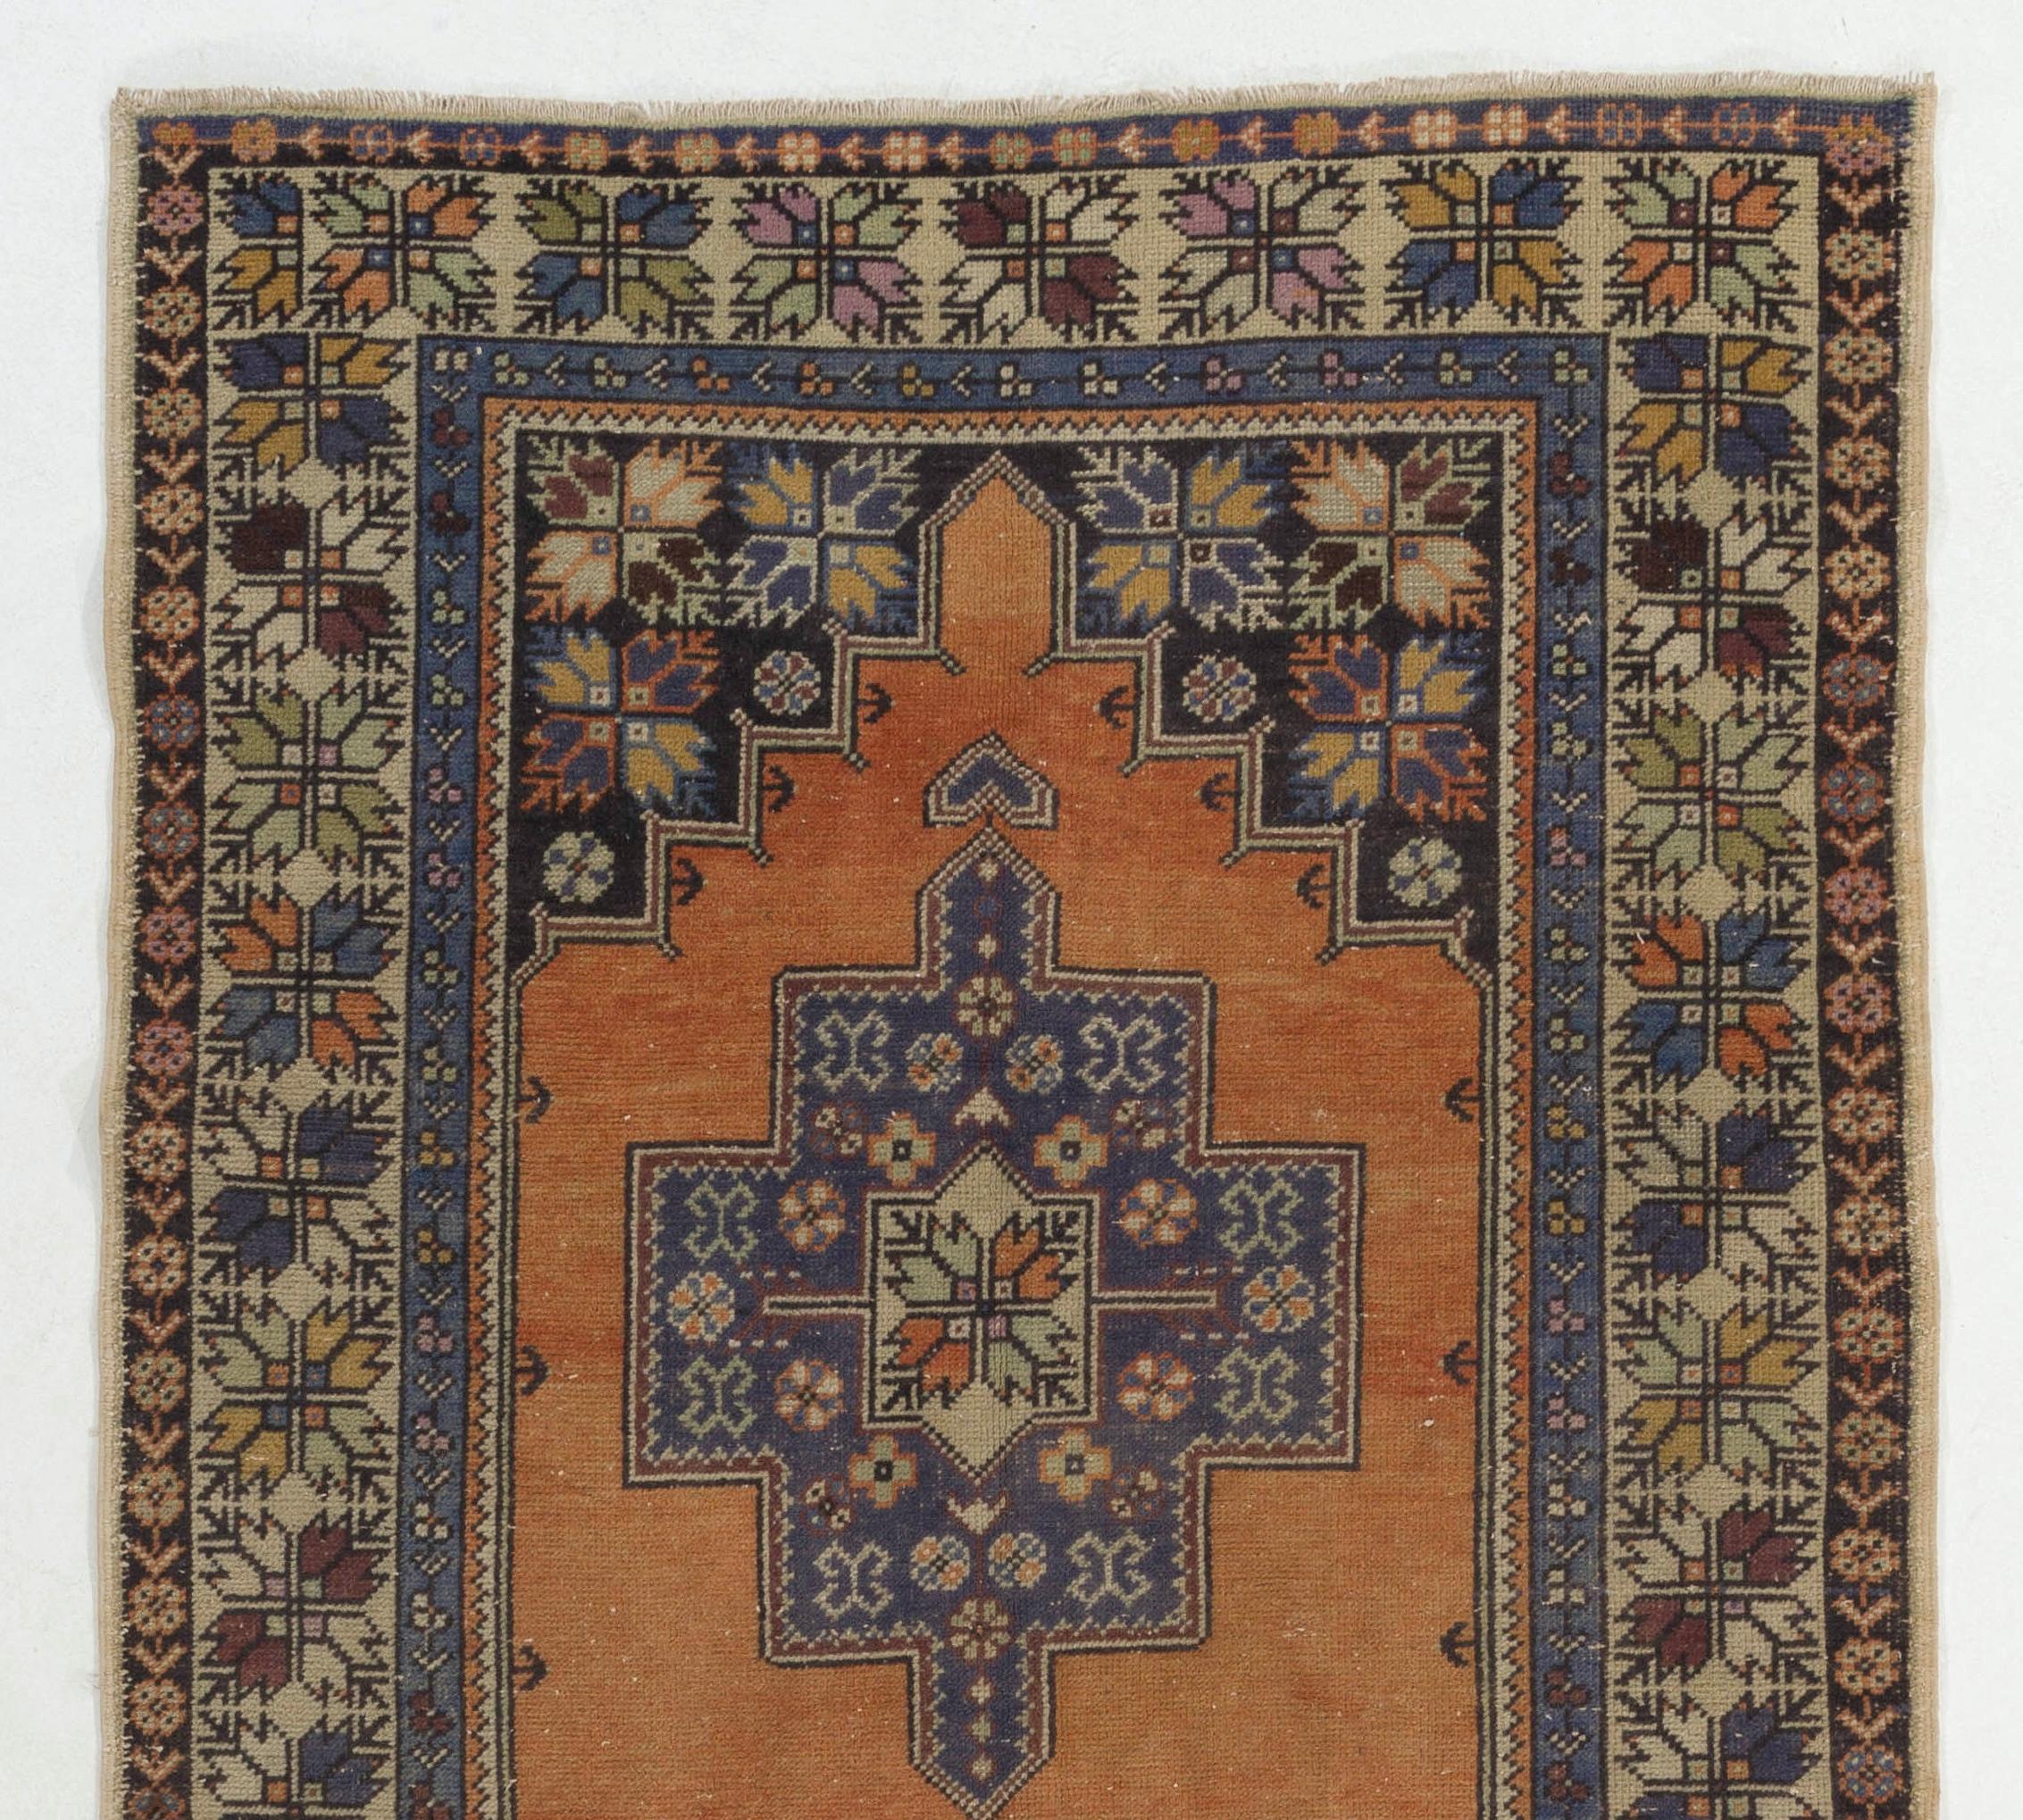 This vintage hand knotted Turkish rug features two linked geometric medallions in cornflower blue decorated with free floating small floral heads and star motifs against a plain field in soft, faded madder red. The corner pieces have a dark, black